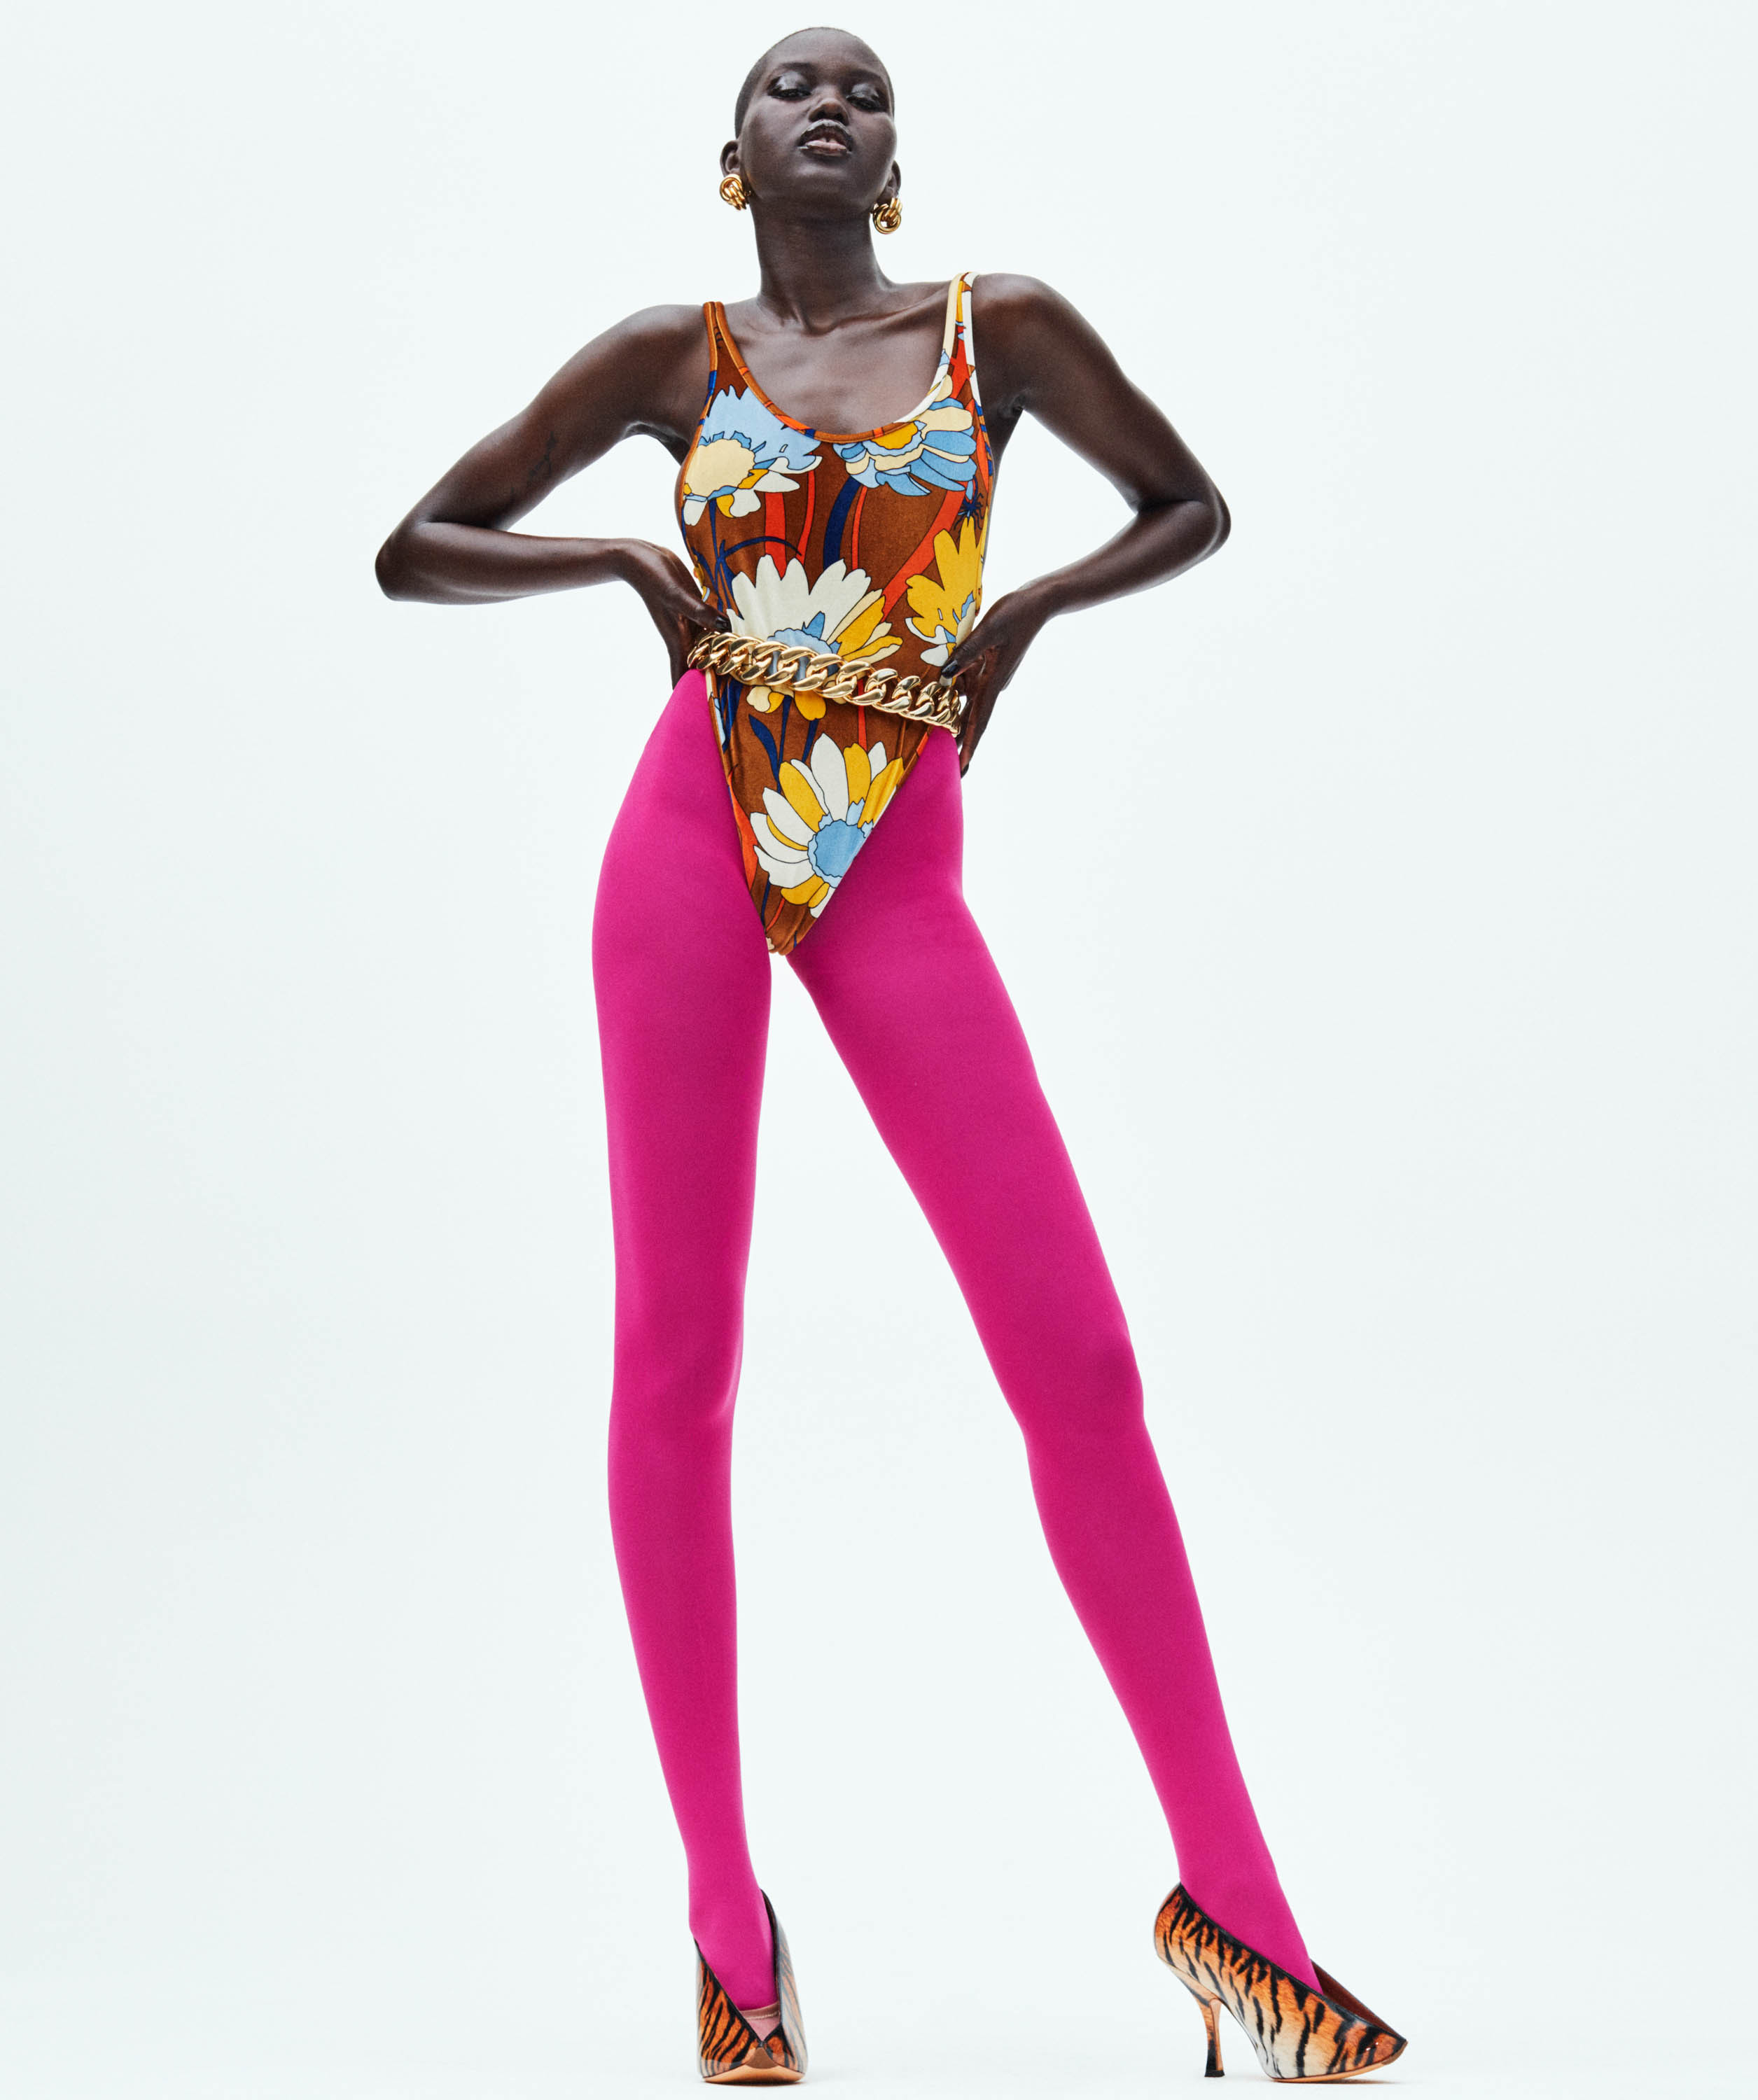 Photos n°4 : Adut Akech and her Mile Long Legs